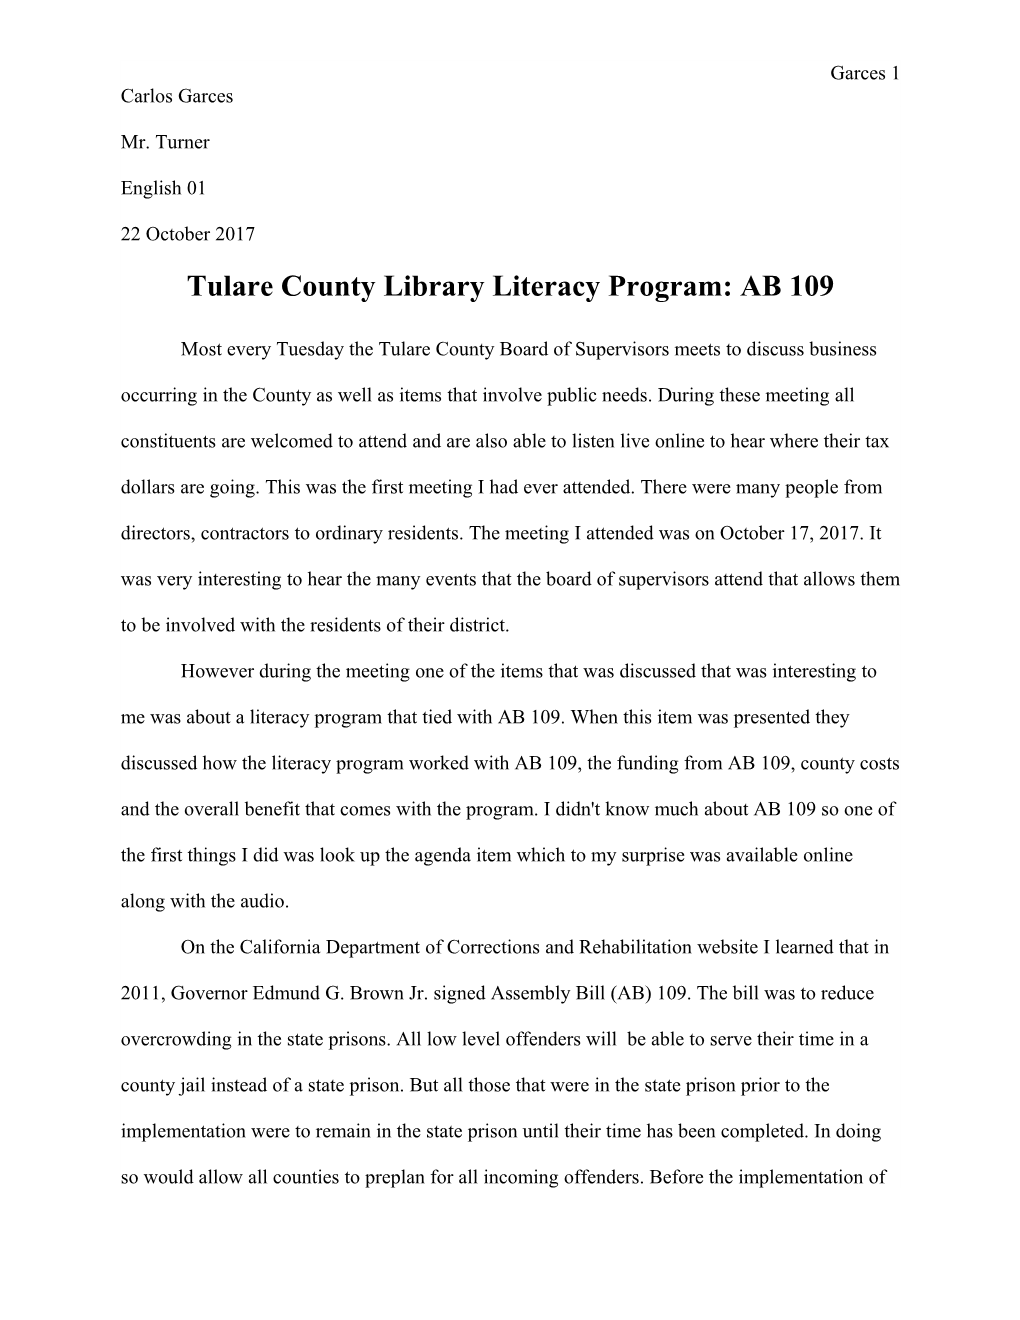 Tulare County Library Literacy Program: AB 109